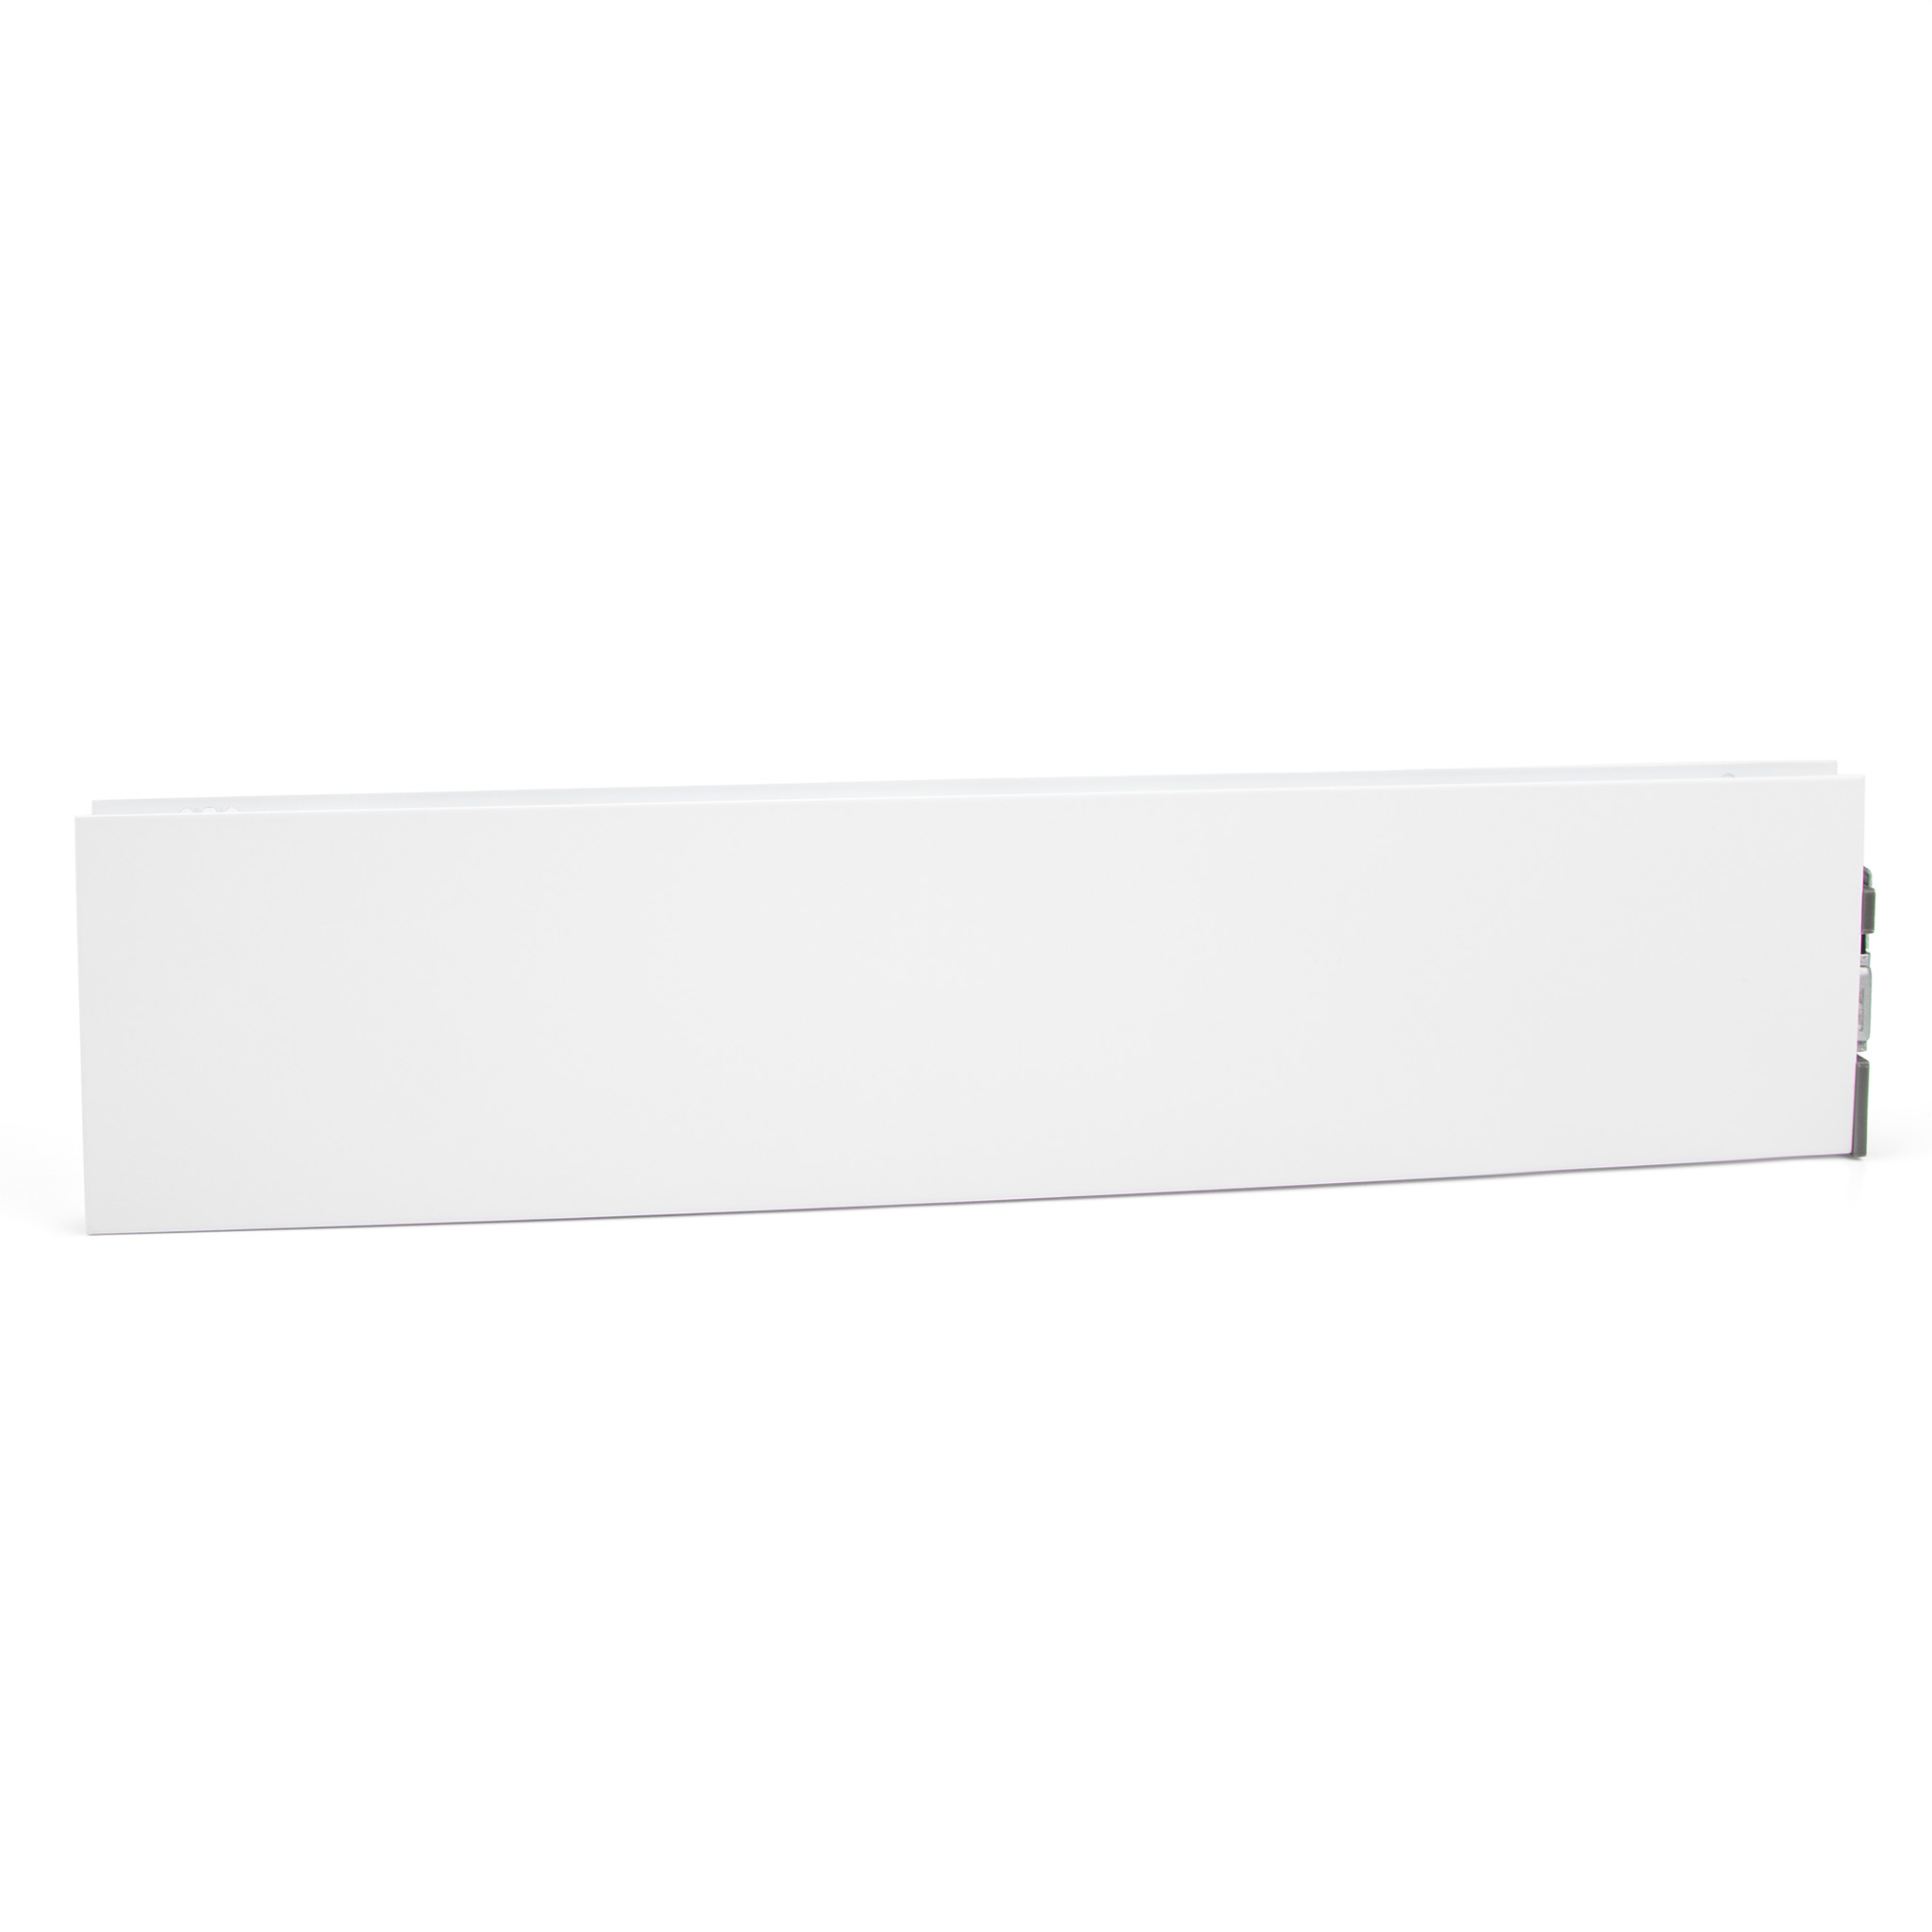 M-Series Fusion Side Wall, 550mm Length, 88mm Height, Lunar White